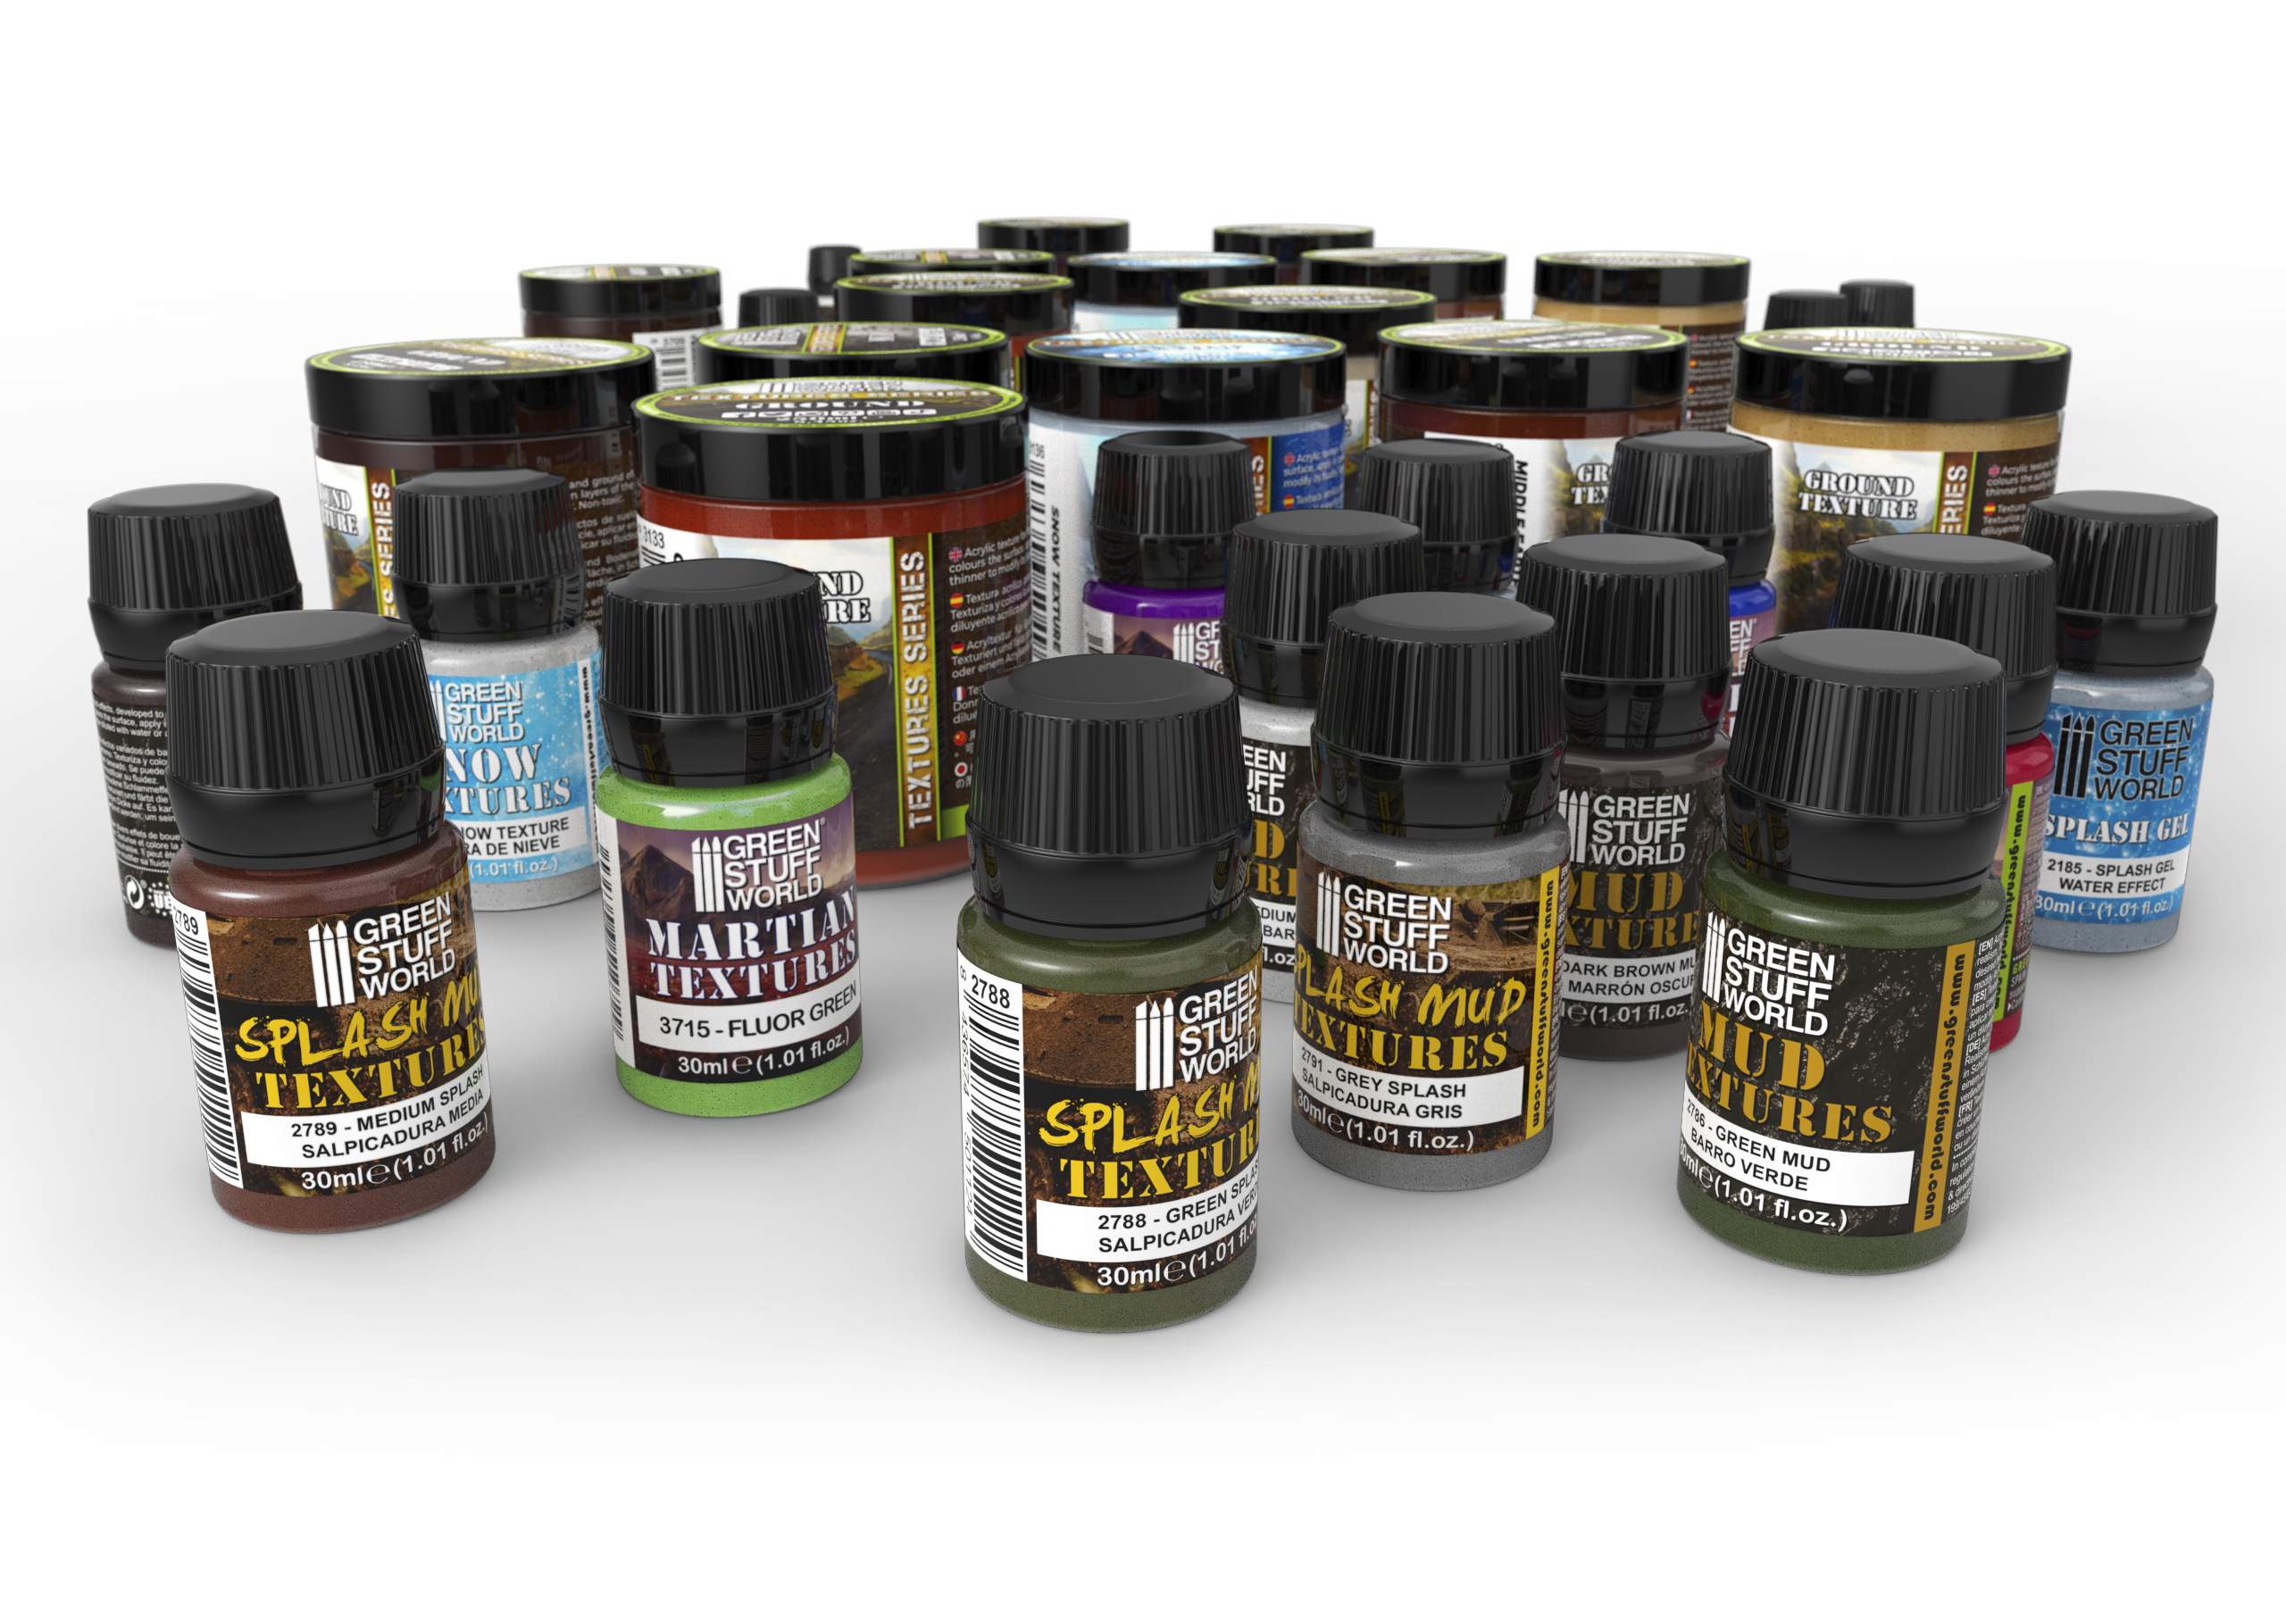 Textured paints for miniatures